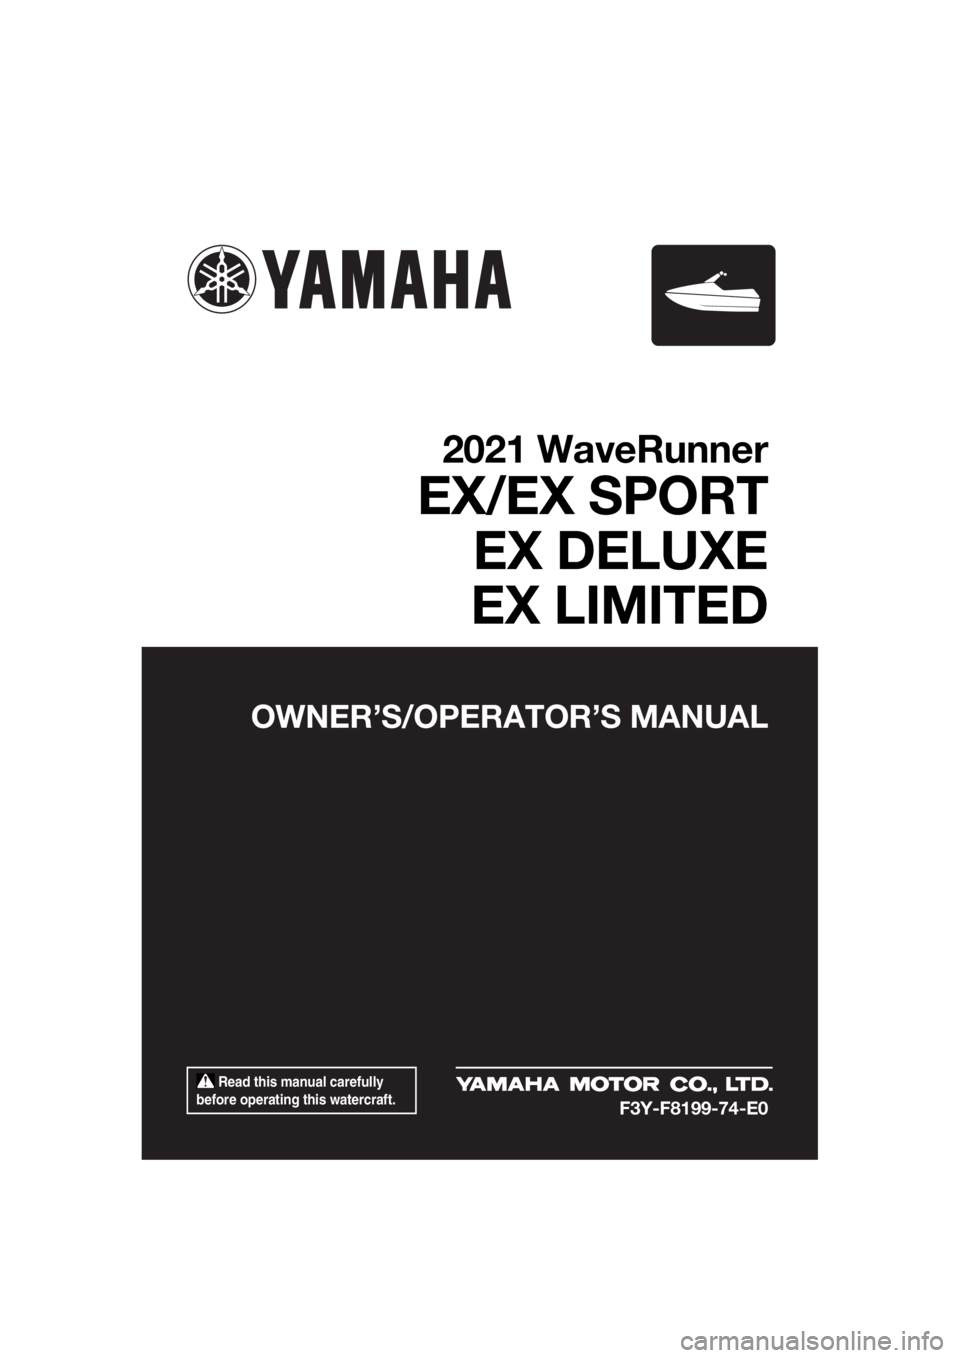 YAMAHA EX SPORT 2021  Owners Manual  Read this manual carefully 
before operating this watercraft.
OWNER’S/OPERAT OR’S MANUAL
2021 WaveRunner
EX/EX SPORT
EX DELUXE
EX LIMITED
F3Y-F8199-74-E0
UF3Y74E0.book  Page 1  Monday, June 22, 2